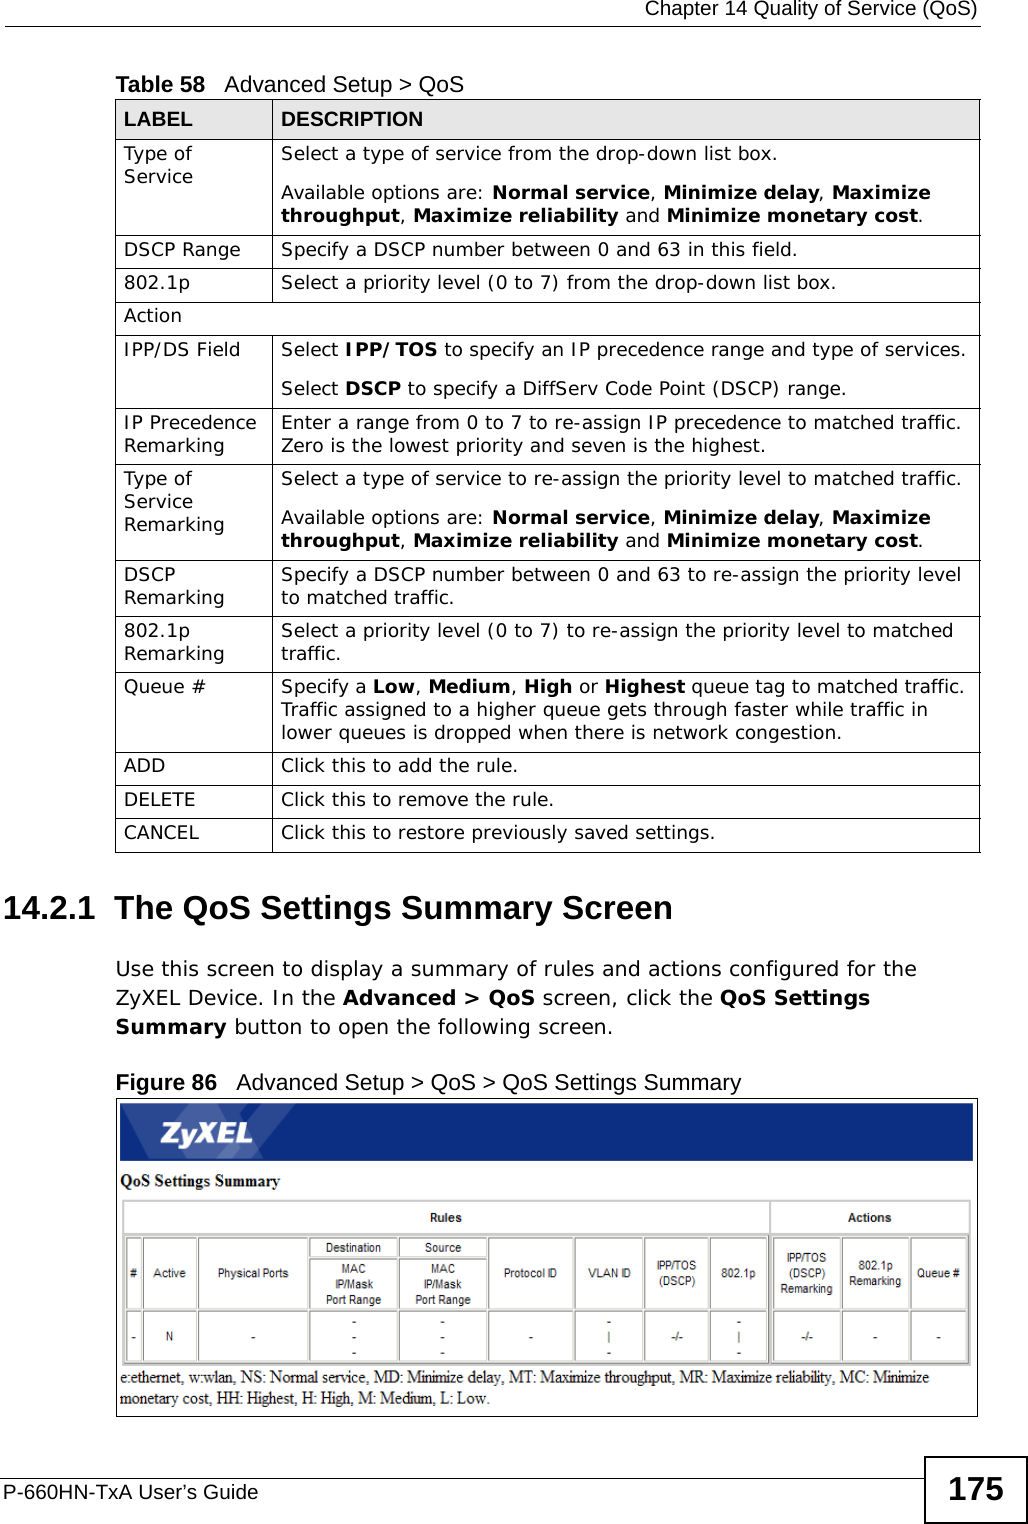  Chapter 14 Quality of Service (QoS)P-660HN-TxA User’s Guide 17514.2.1  The QoS Settings Summary Screen Use this screen to display a summary of rules and actions configured for the ZyXEL Device. In the Advanced &gt; QoS screen, click the QoS Settings Summary button to open the following screen.Figure 86   Advanced Setup &gt; QoS &gt; QoS Settings SummaryType of Service Select a type of service from the drop-down list box.Available options are: Normal service, Minimize delay, Maximize throughput, Maximize reliability and Minimize monetary cost.DSCP Range Specify a DSCP number between 0 and 63 in this field.802.1p Select a priority level (0 to 7) from the drop-down list box.ActionIPP/DS Field Select IPP/TOS to specify an IP precedence range and type of services.Select DSCP to specify a DiffServ Code Point (DSCP) range.IP Precedence Remarking Enter a range from 0 to 7 to re-assign IP precedence to matched traffic. Zero is the lowest priority and seven is the highest.Type of Service RemarkingSelect a type of service to re-assign the priority level to matched traffic.Available options are: Normal service, Minimize delay, Maximize throughput, Maximize reliability and Minimize monetary cost.DSCP Remarking Specify a DSCP number between 0 and 63 to re-assign the priority level to matched traffic.802.1p Remarking Select a priority level (0 to 7) to re-assign the priority level to matched traffic.Queue # Specify a Low, Medium, High or Highest queue tag to matched traffic. Traffic assigned to a higher queue gets through faster while traffic in lower queues is dropped when there is network congestion.ADD Click this to add the rule.DELETE Click this to remove the rule.CANCEL Click this to restore previously saved settings.Table 58   Advanced Setup &gt; QoSLABEL DESCRIPTION